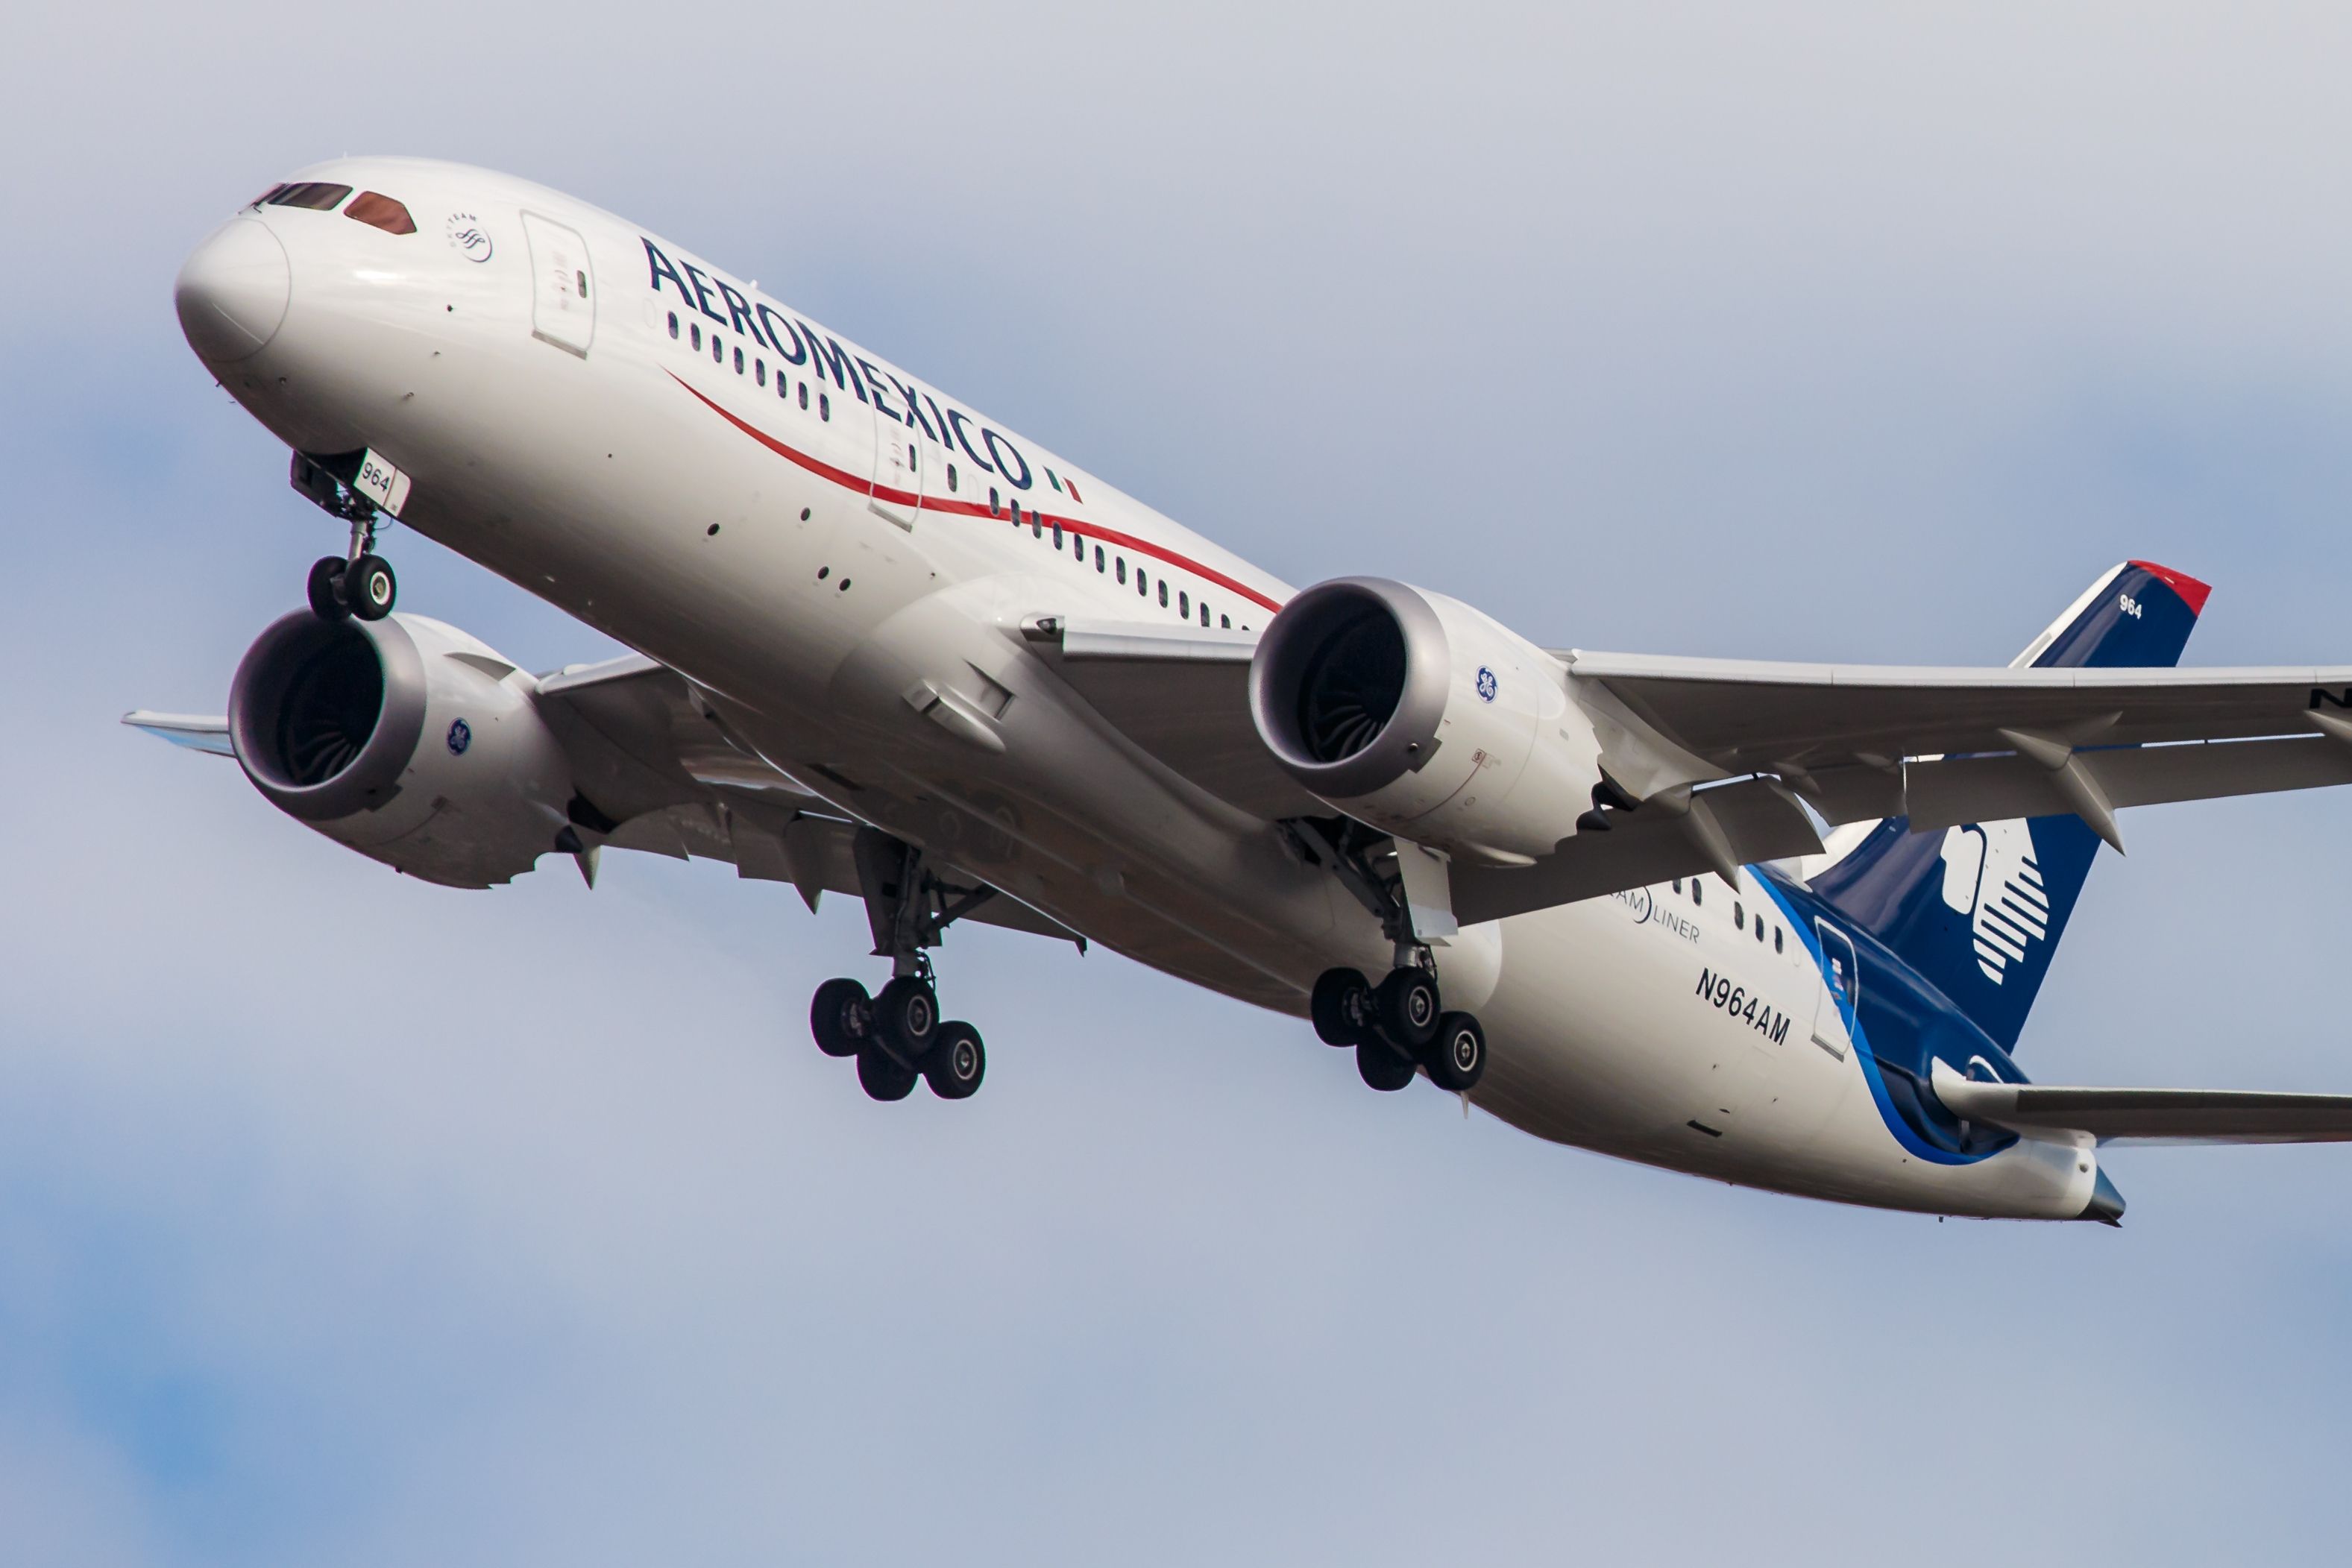 An Aeromexico Boeing 787 flying in the sky.